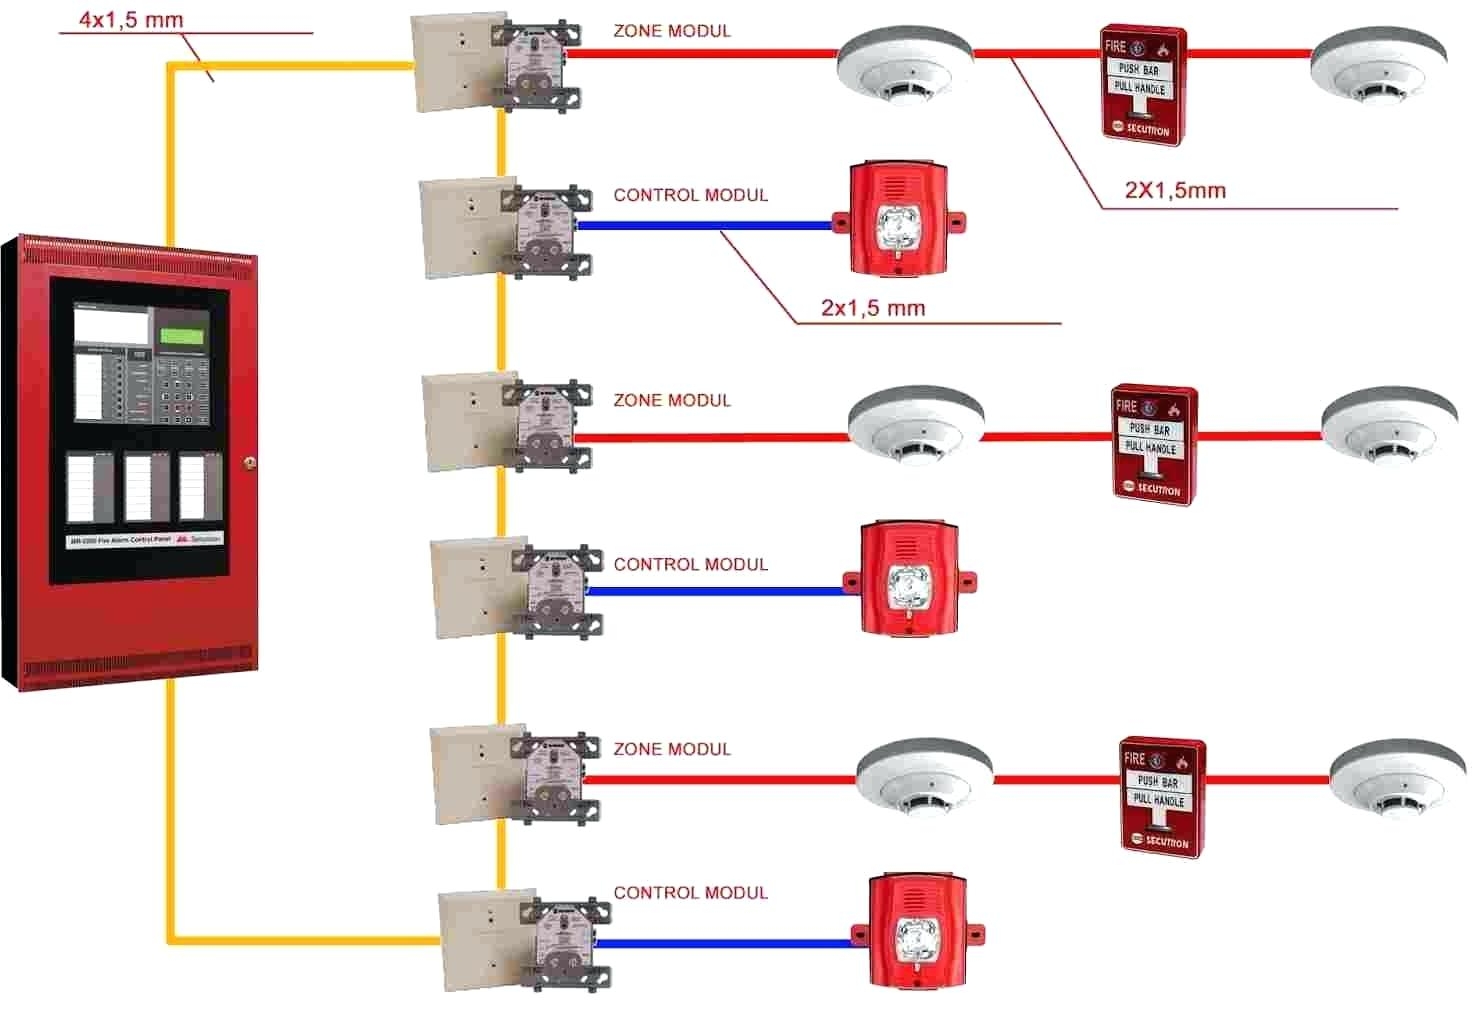 Security System Wiring Diagram from images.squarespace-cdn.com